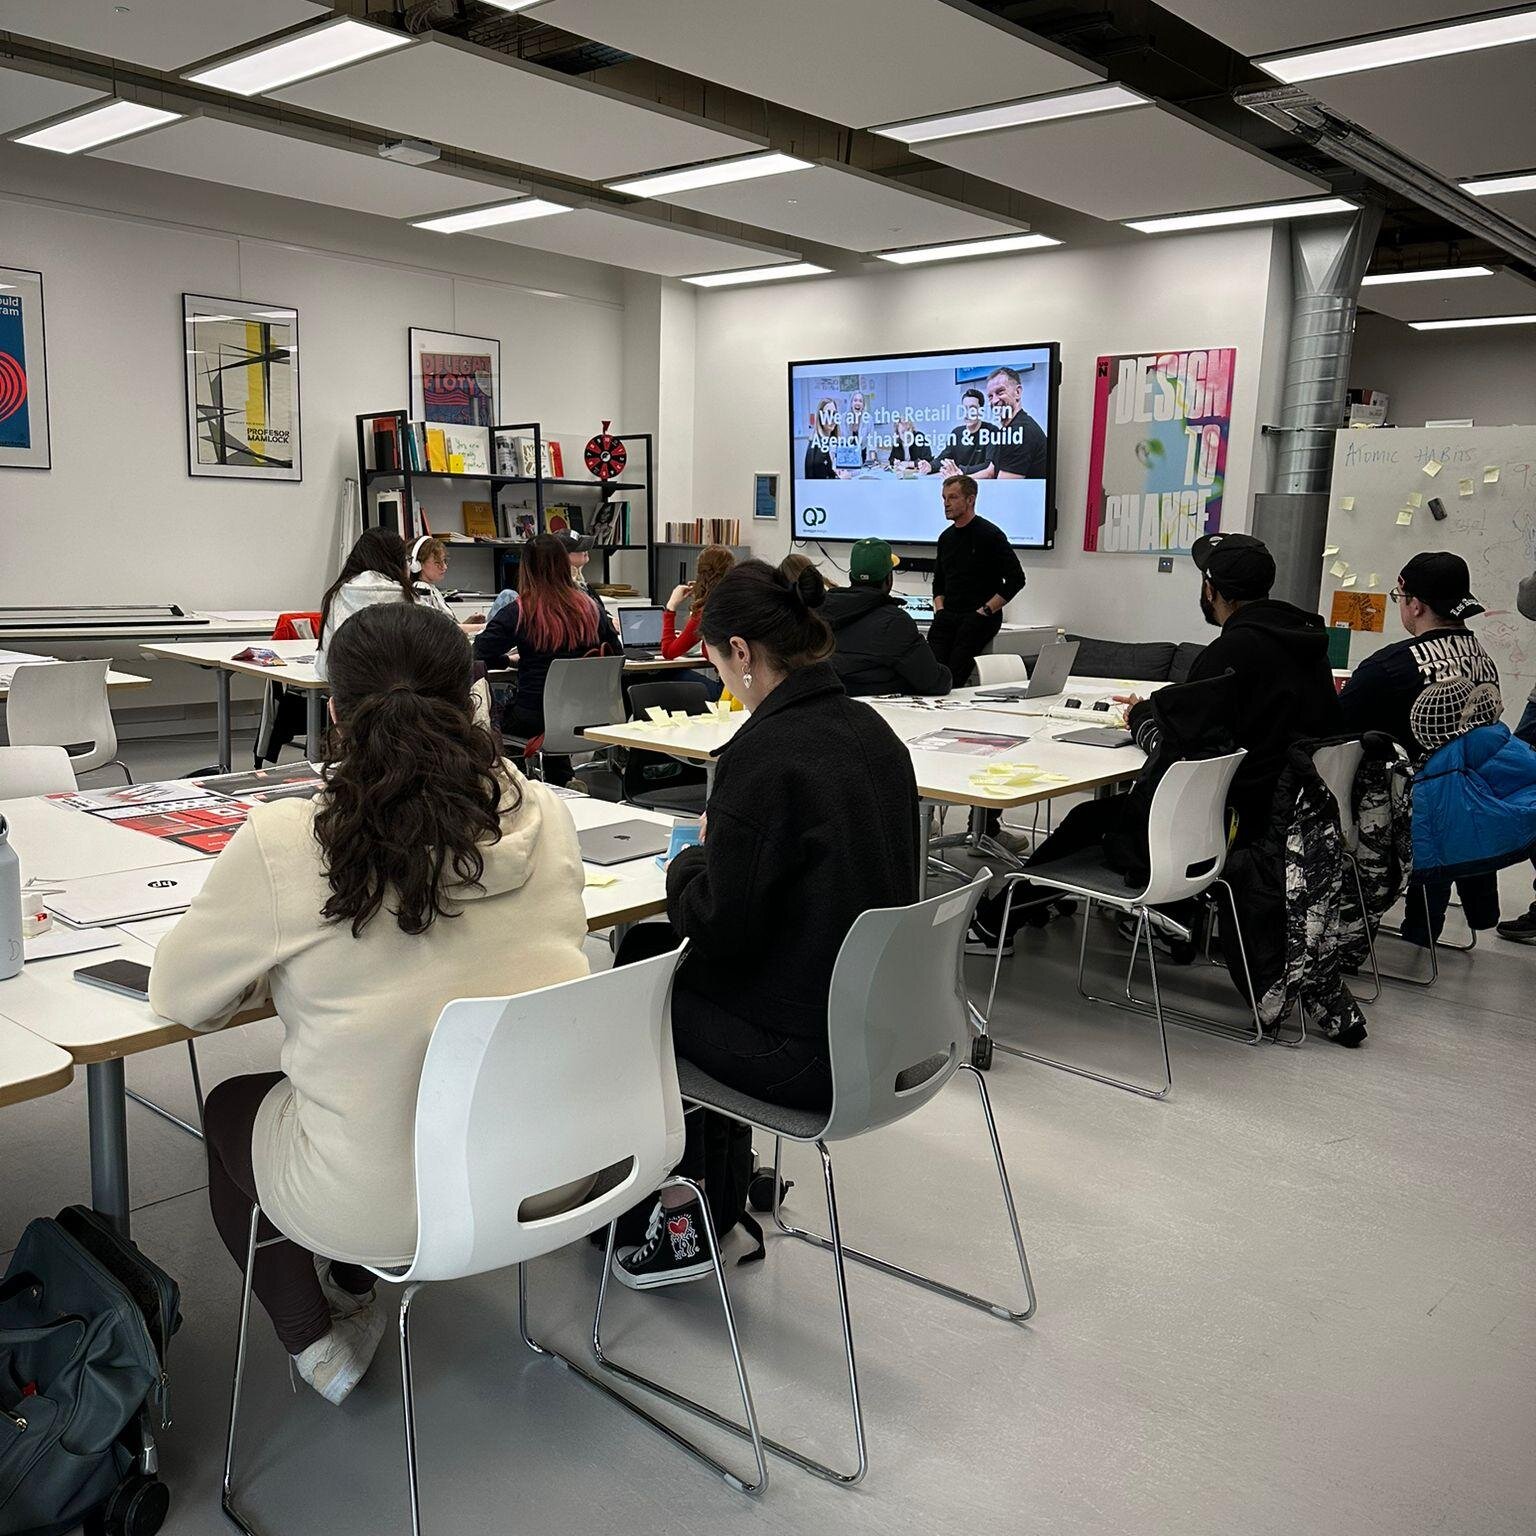 Thank you, UON, and @Trevor Brown for the invitation to present and brief the 3rd year Graphic Design students on a new design project. It was truly an inspiring afternoon, filled with engaging discussions and creative energy. We're thrilled to have 